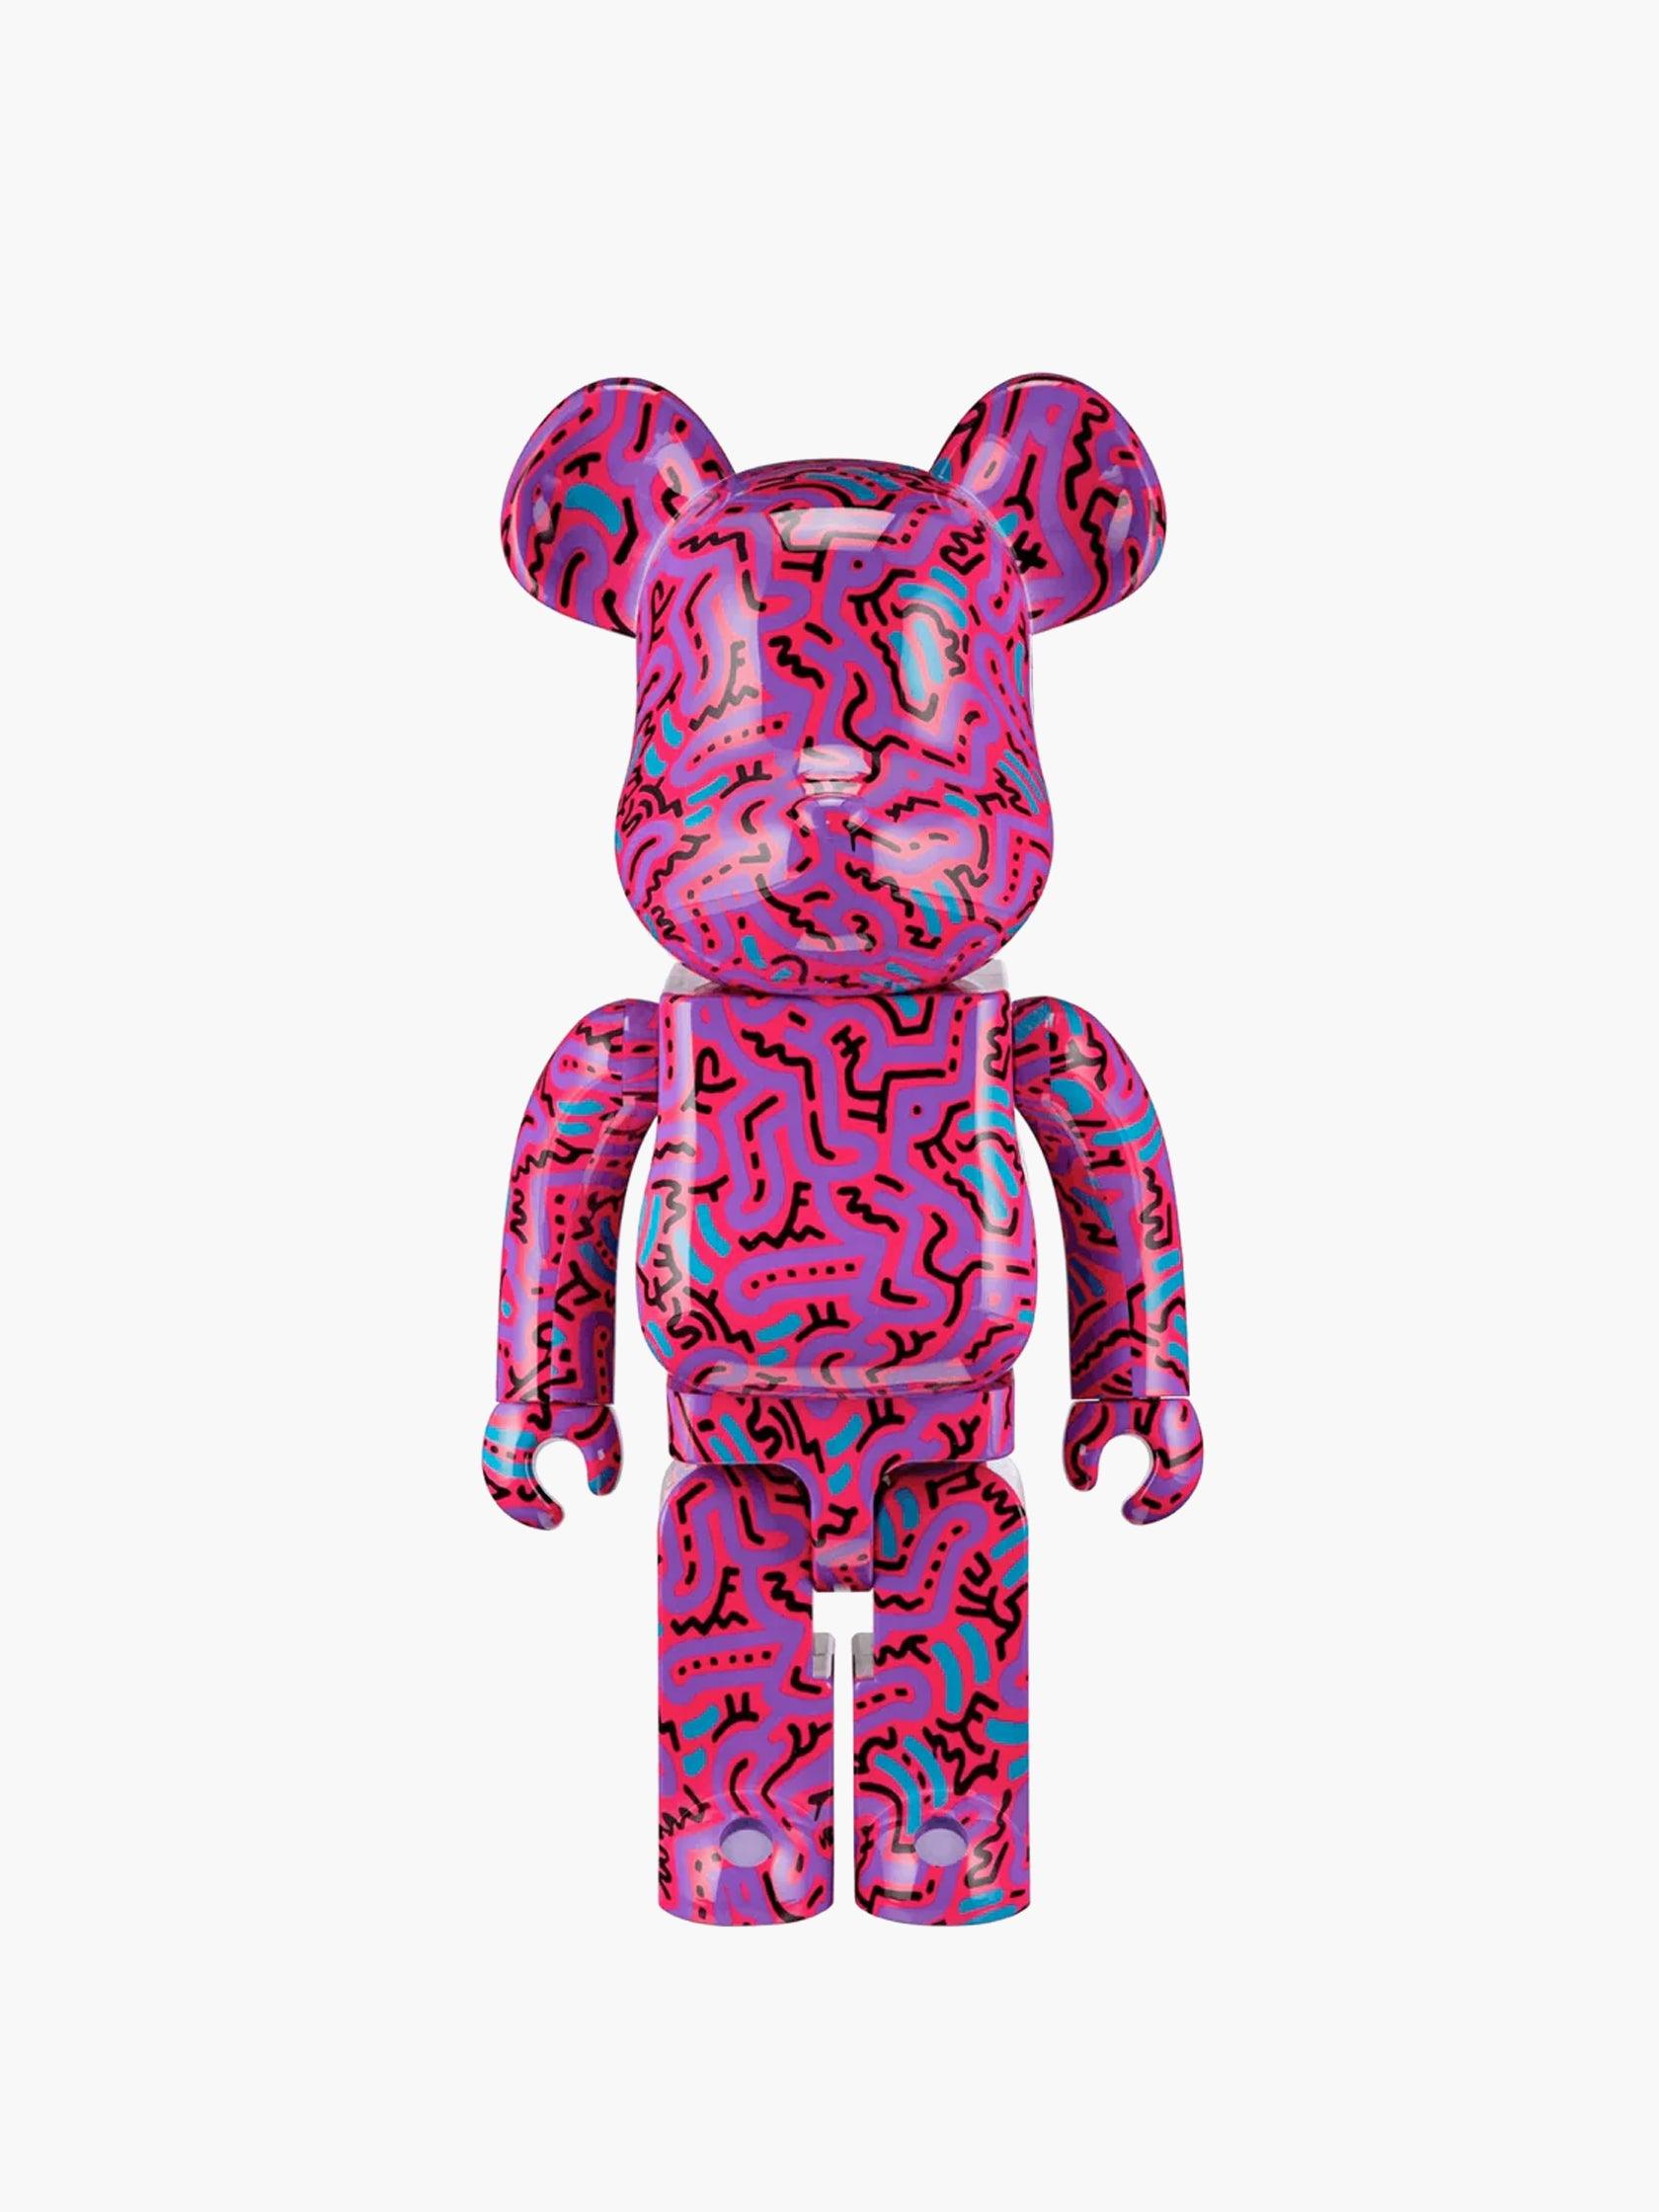 BE@RBRICK Keith Haring #2 "Untitled Pink 1984" 1000% by Medicom Toy - Mankovsky Gallery